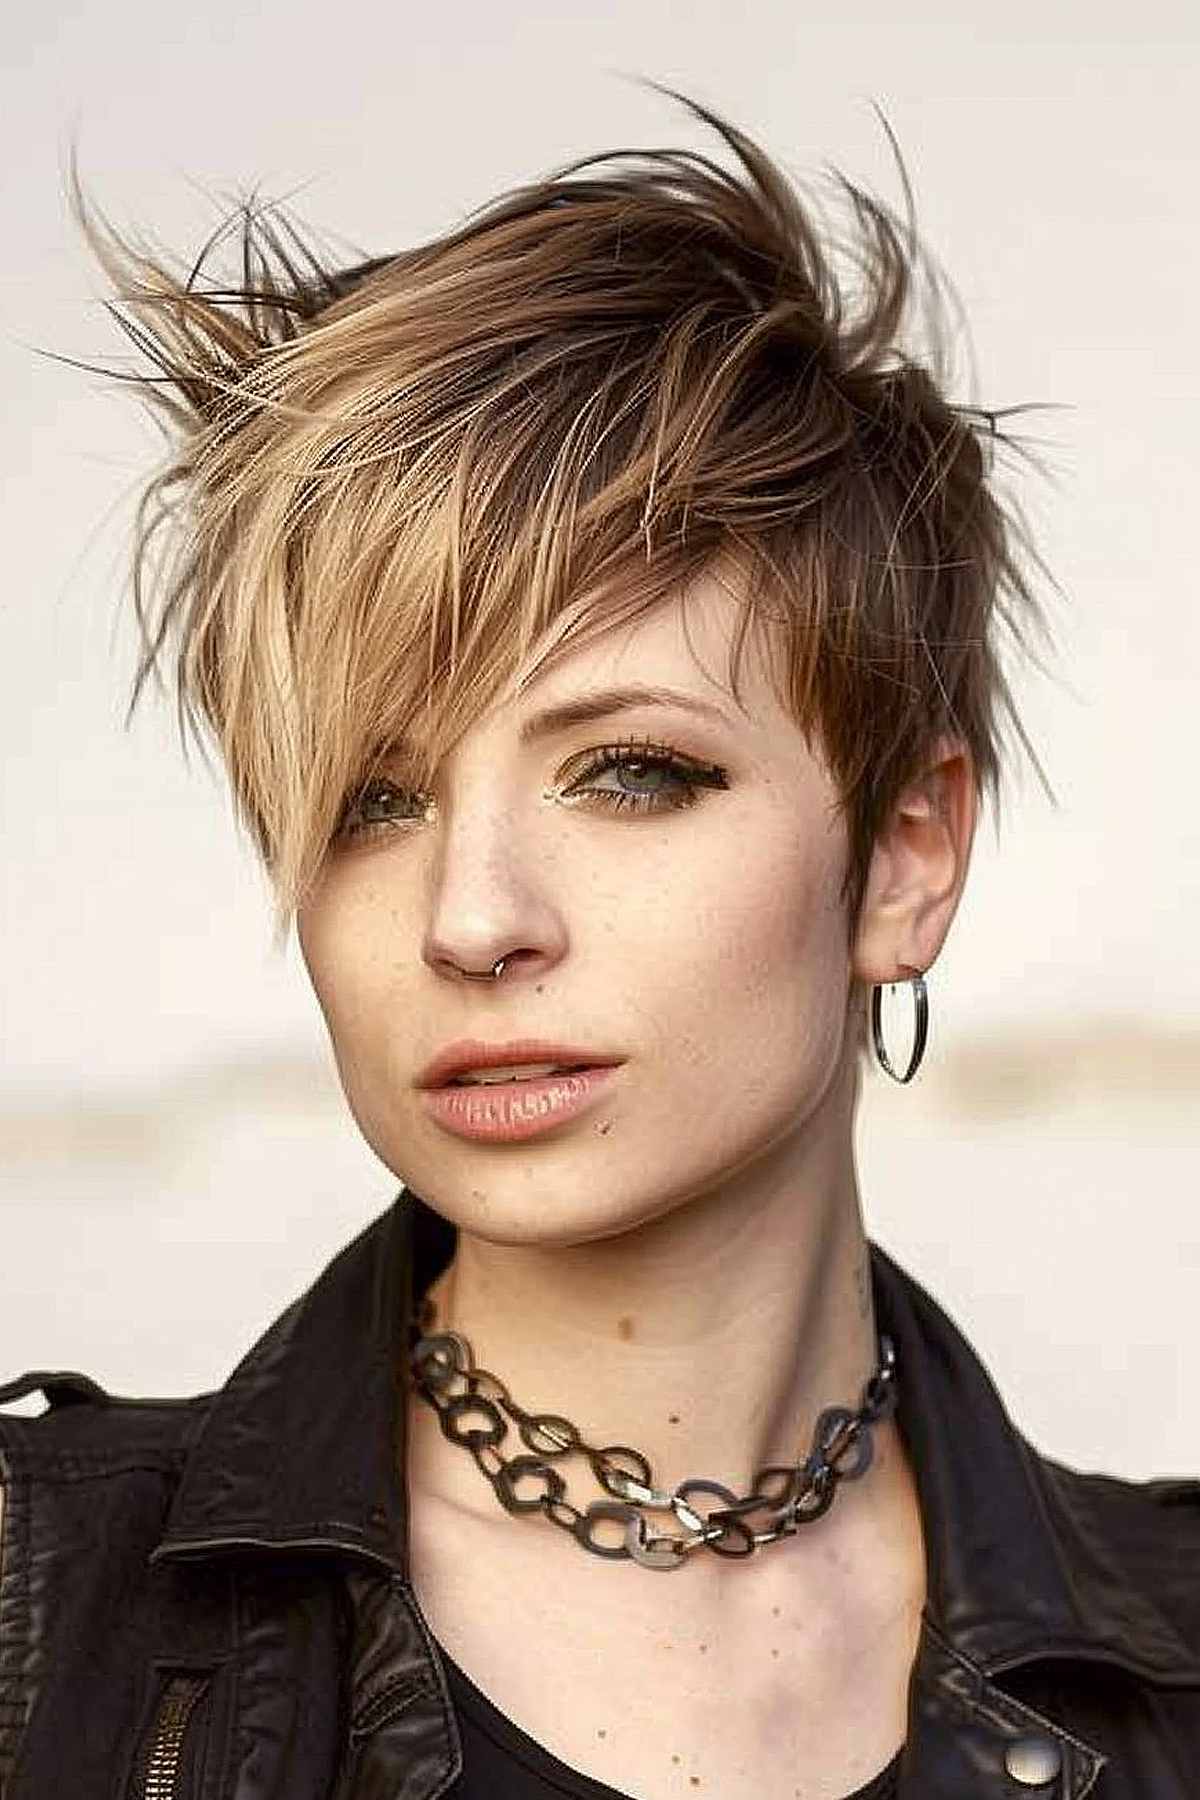 Edgy punk pixie cut with angular, asymmetrical bangs in multi-tonal blonde and brown, designed to add volume and emphasize facial features.